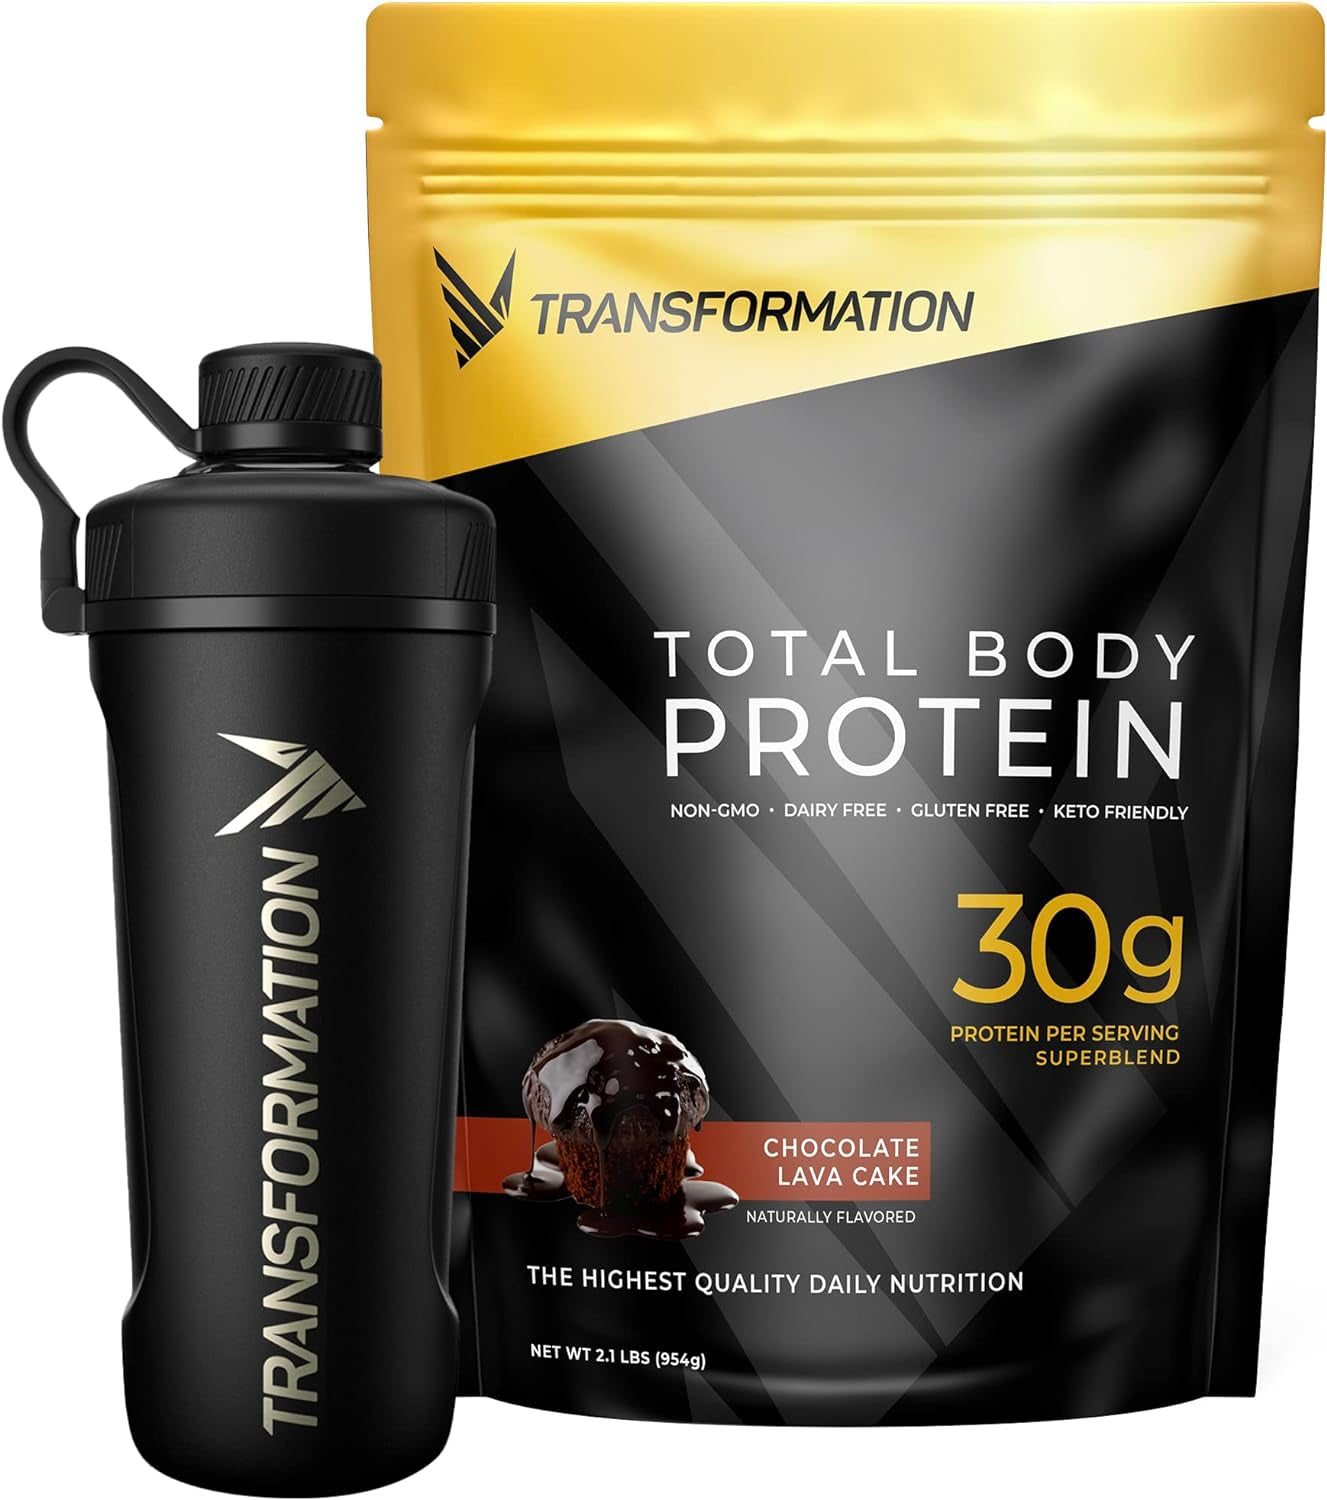 SPR BODY Transformation Chocolate Protein Powder & Performance Insulated Shaker Bottle | 30G Multi-Protein Superblend | Collagen Peptides, Egg White & Plant Blend | MCT Oil | BCAA Amino Acids